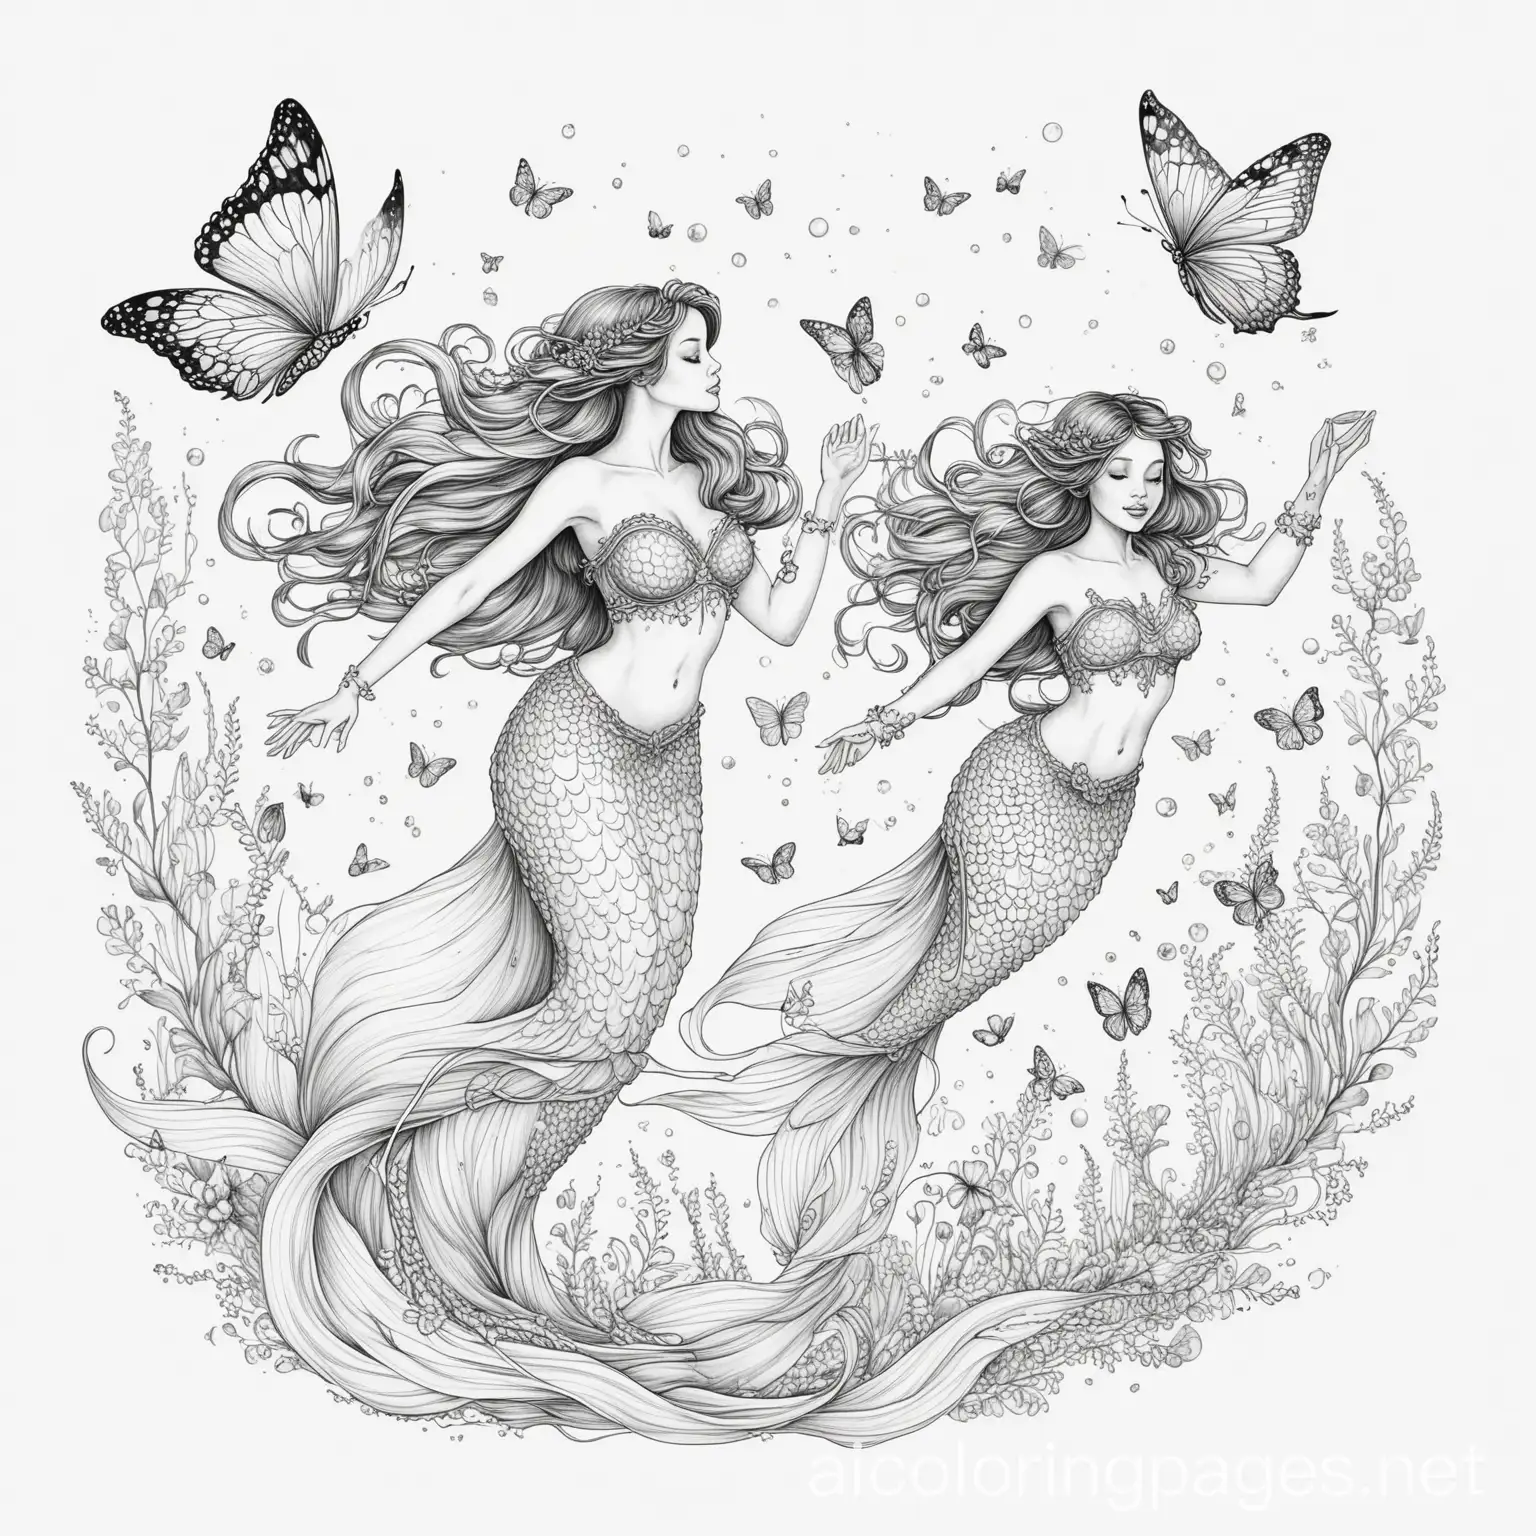 Mermaids with butterflies flying with a sky sea, Coloring Page, black and white, line art, white background, Simplicity, Ample White Space. The background of the coloring page is plain white to make it easy for young children to color within the lines. The outlines of all the subjects are easy to distinguish, making it simple for kids to color without too much difficulty